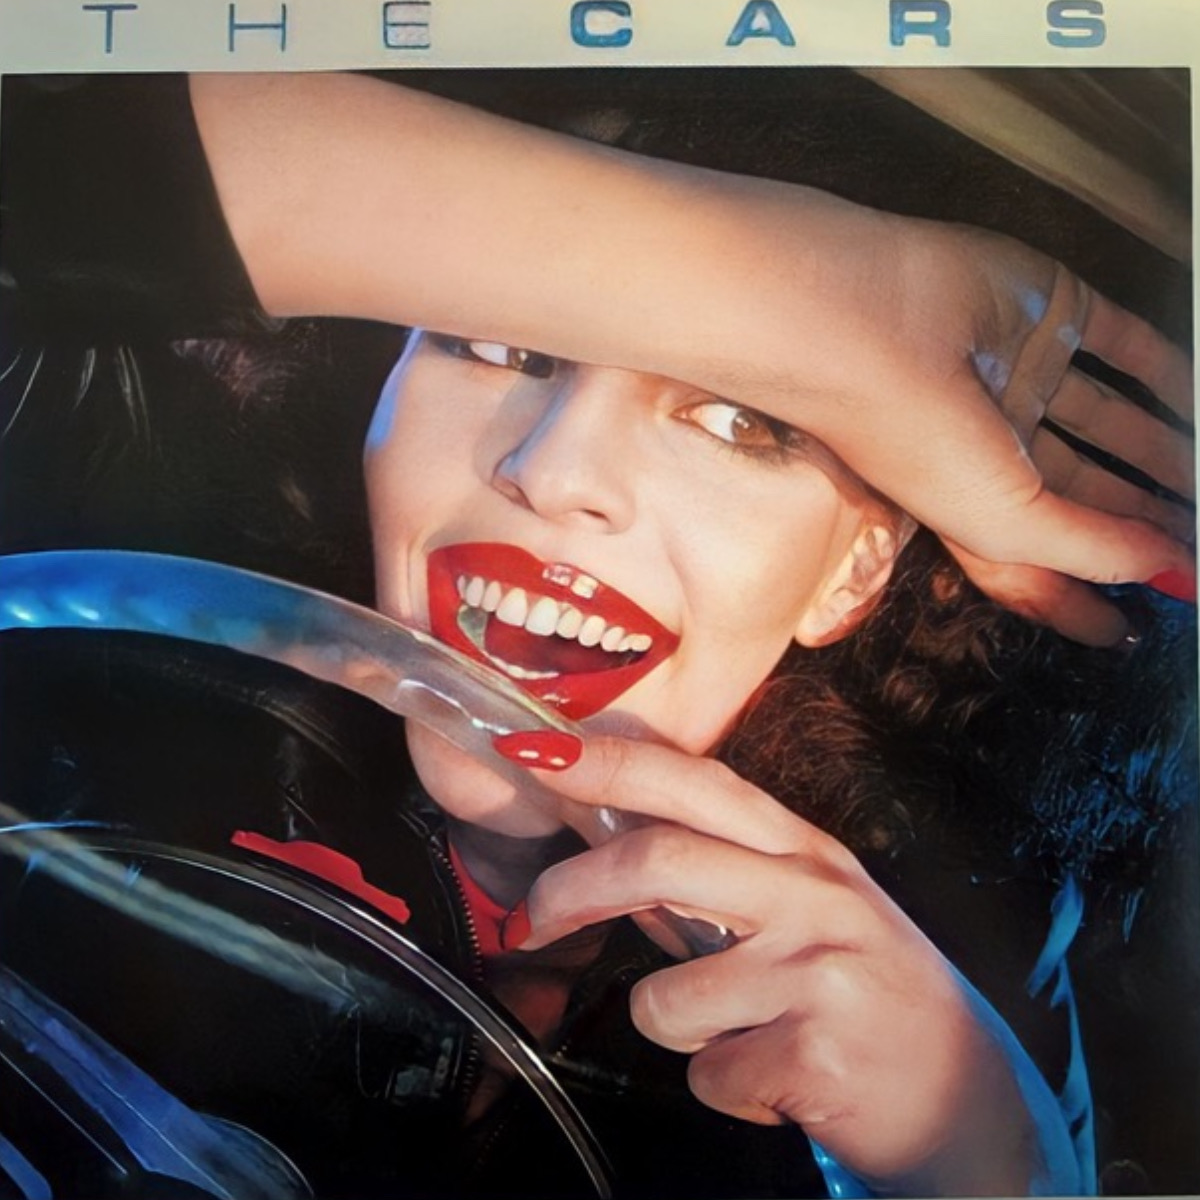 Album cover of "The Cars" by the band The Cars